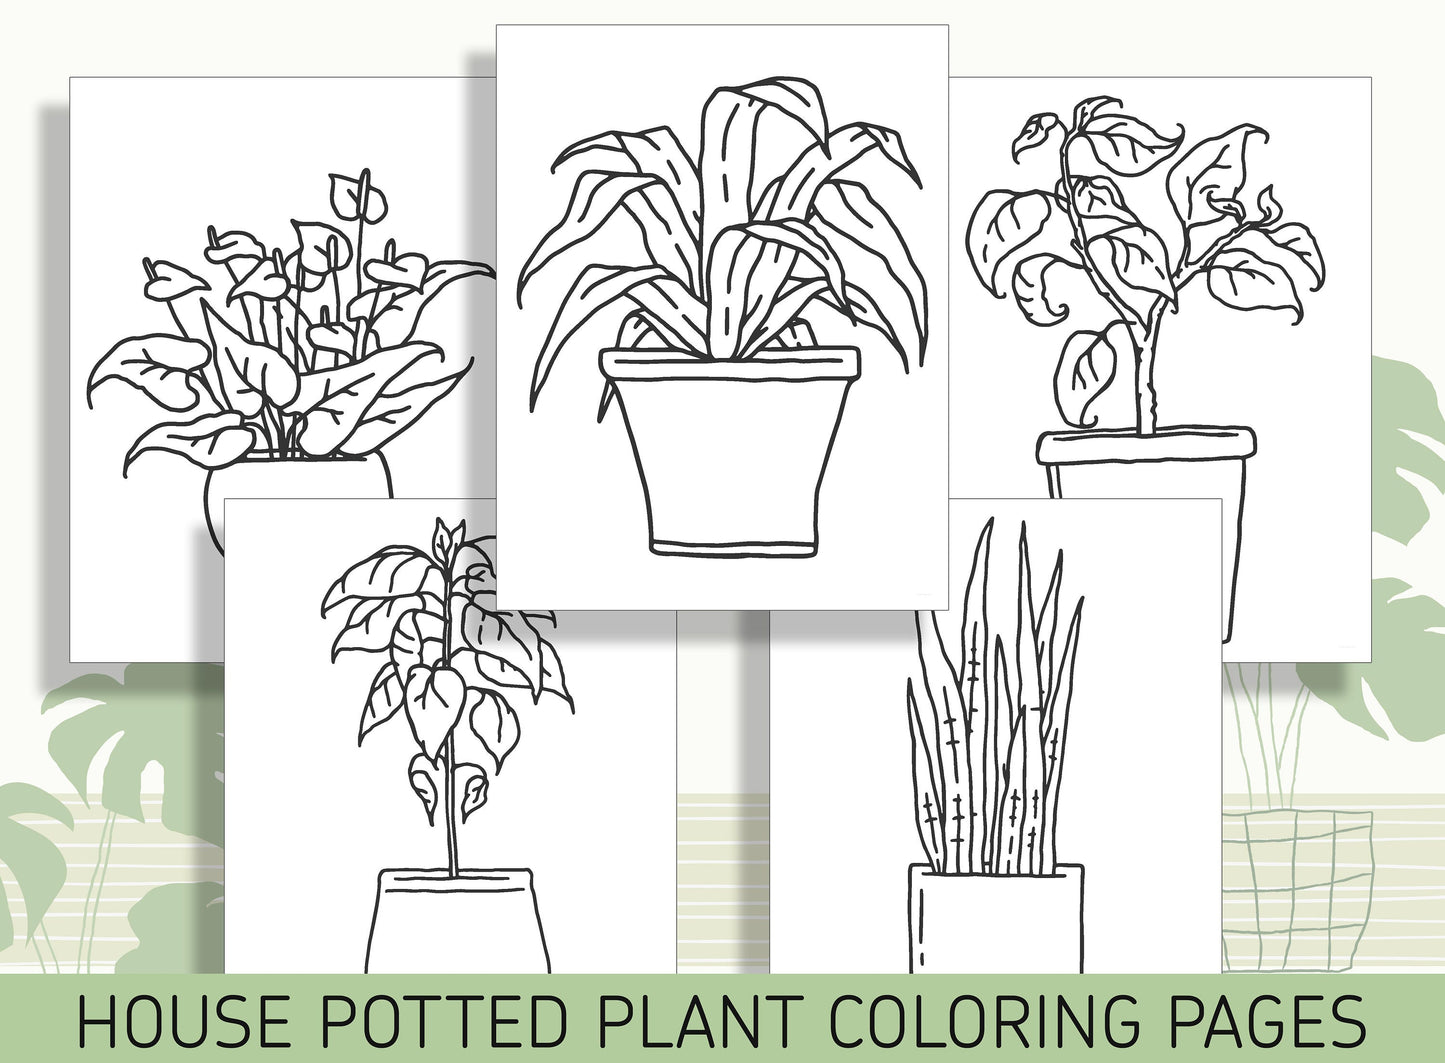 15 Beautiful House Potted Plants Coloring Pages: Bring Nature Indoors, PDF File, Instant Download